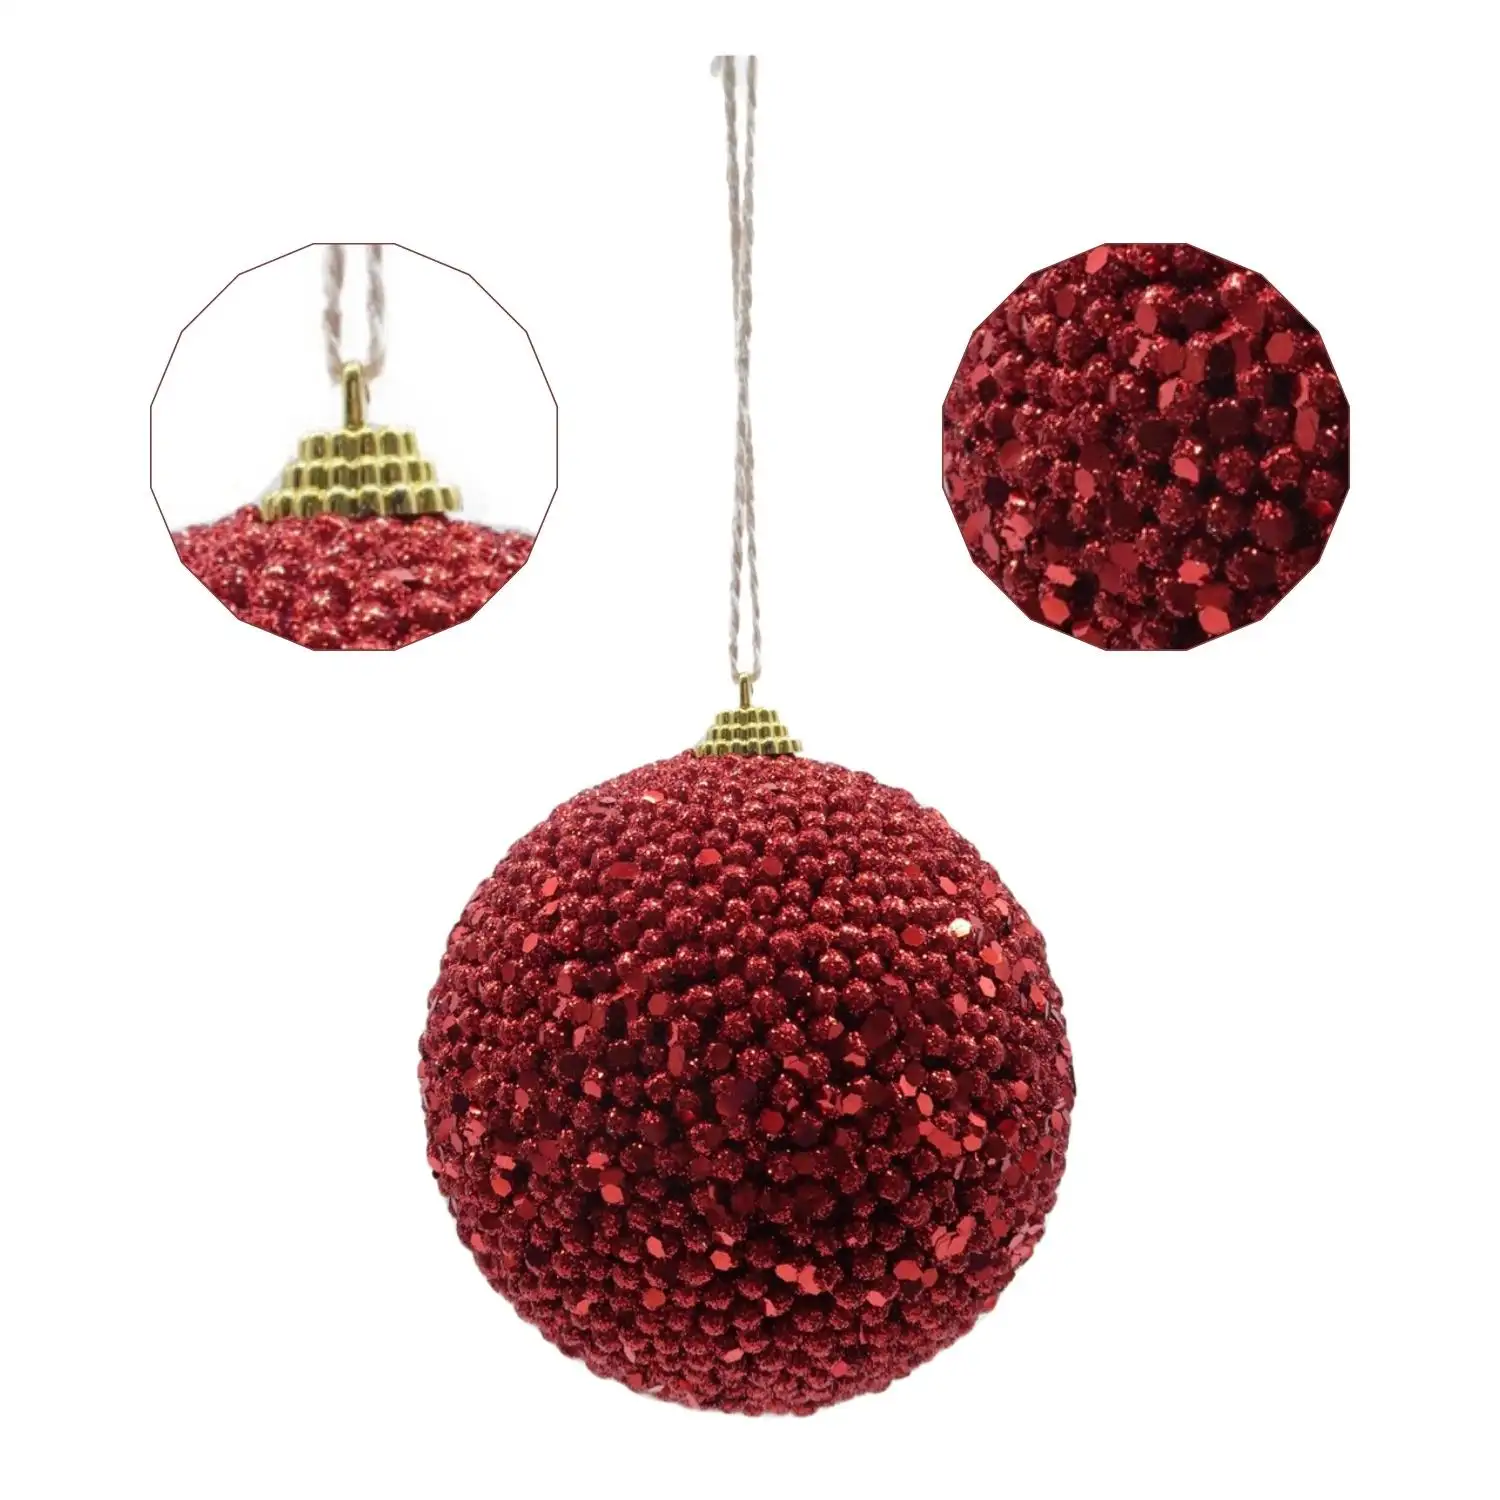 Affordable Other Christmas Decorations Sequined Red Glittered Net Ball Christmas Tree Ornament